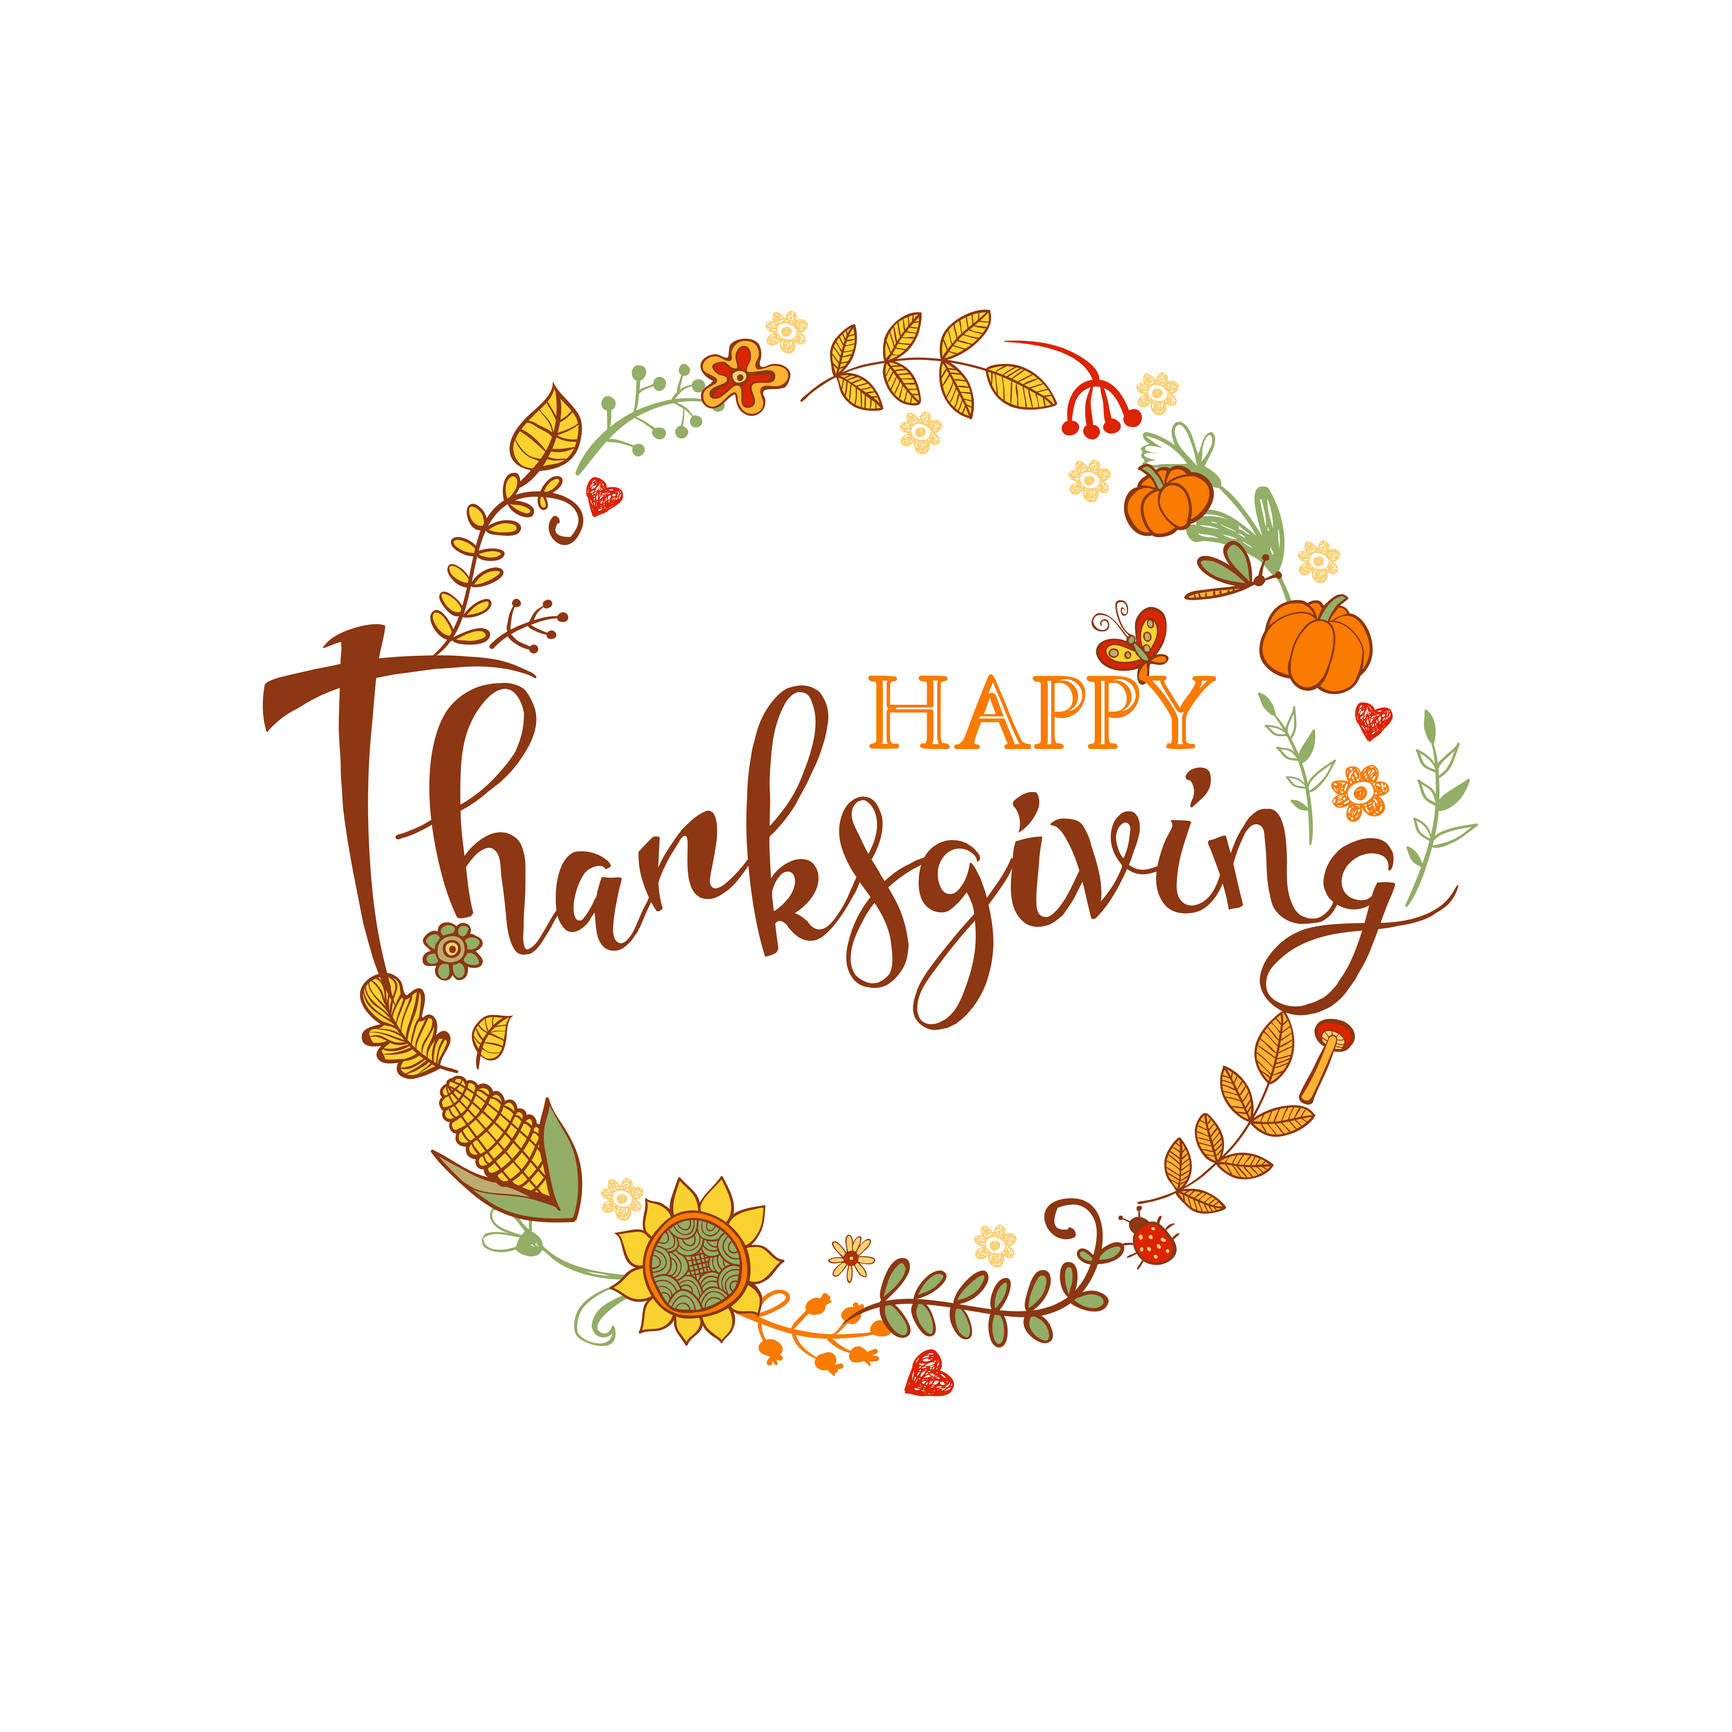 Thanksgiving poster or greeting card with Thanksgiving Calligraphy inscription and holiday traditional symbols.